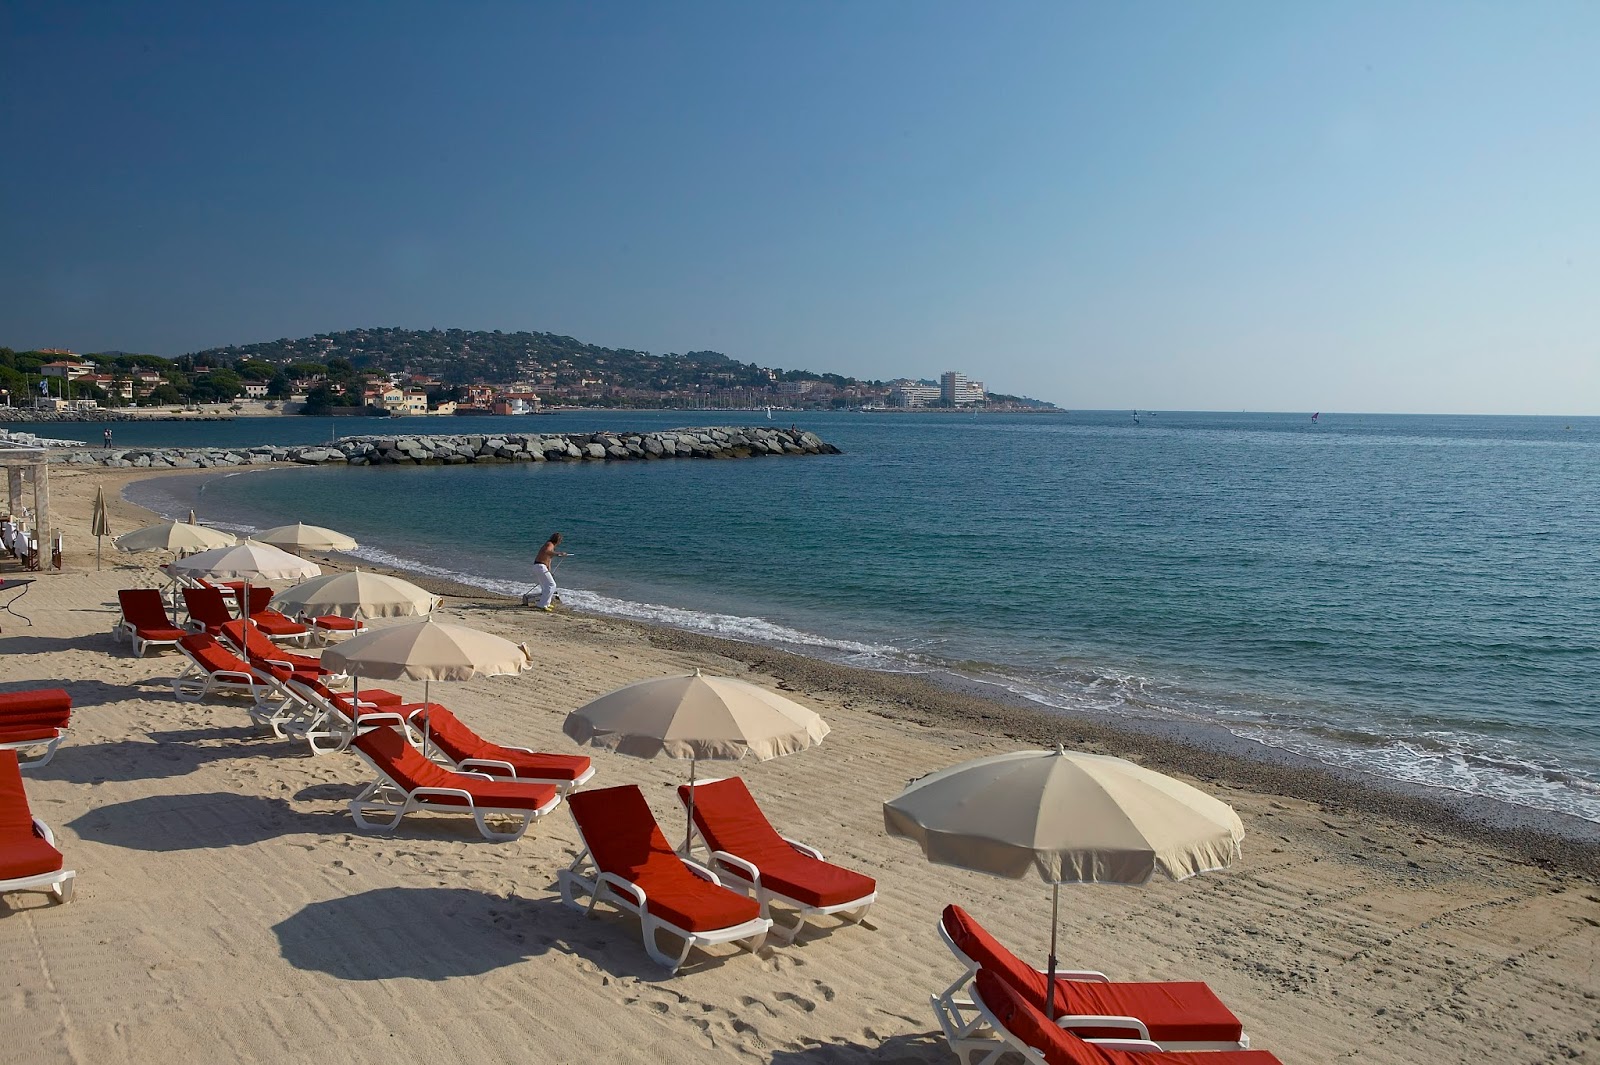 South France Villas: South France Villas guide to our favourite beaches ...